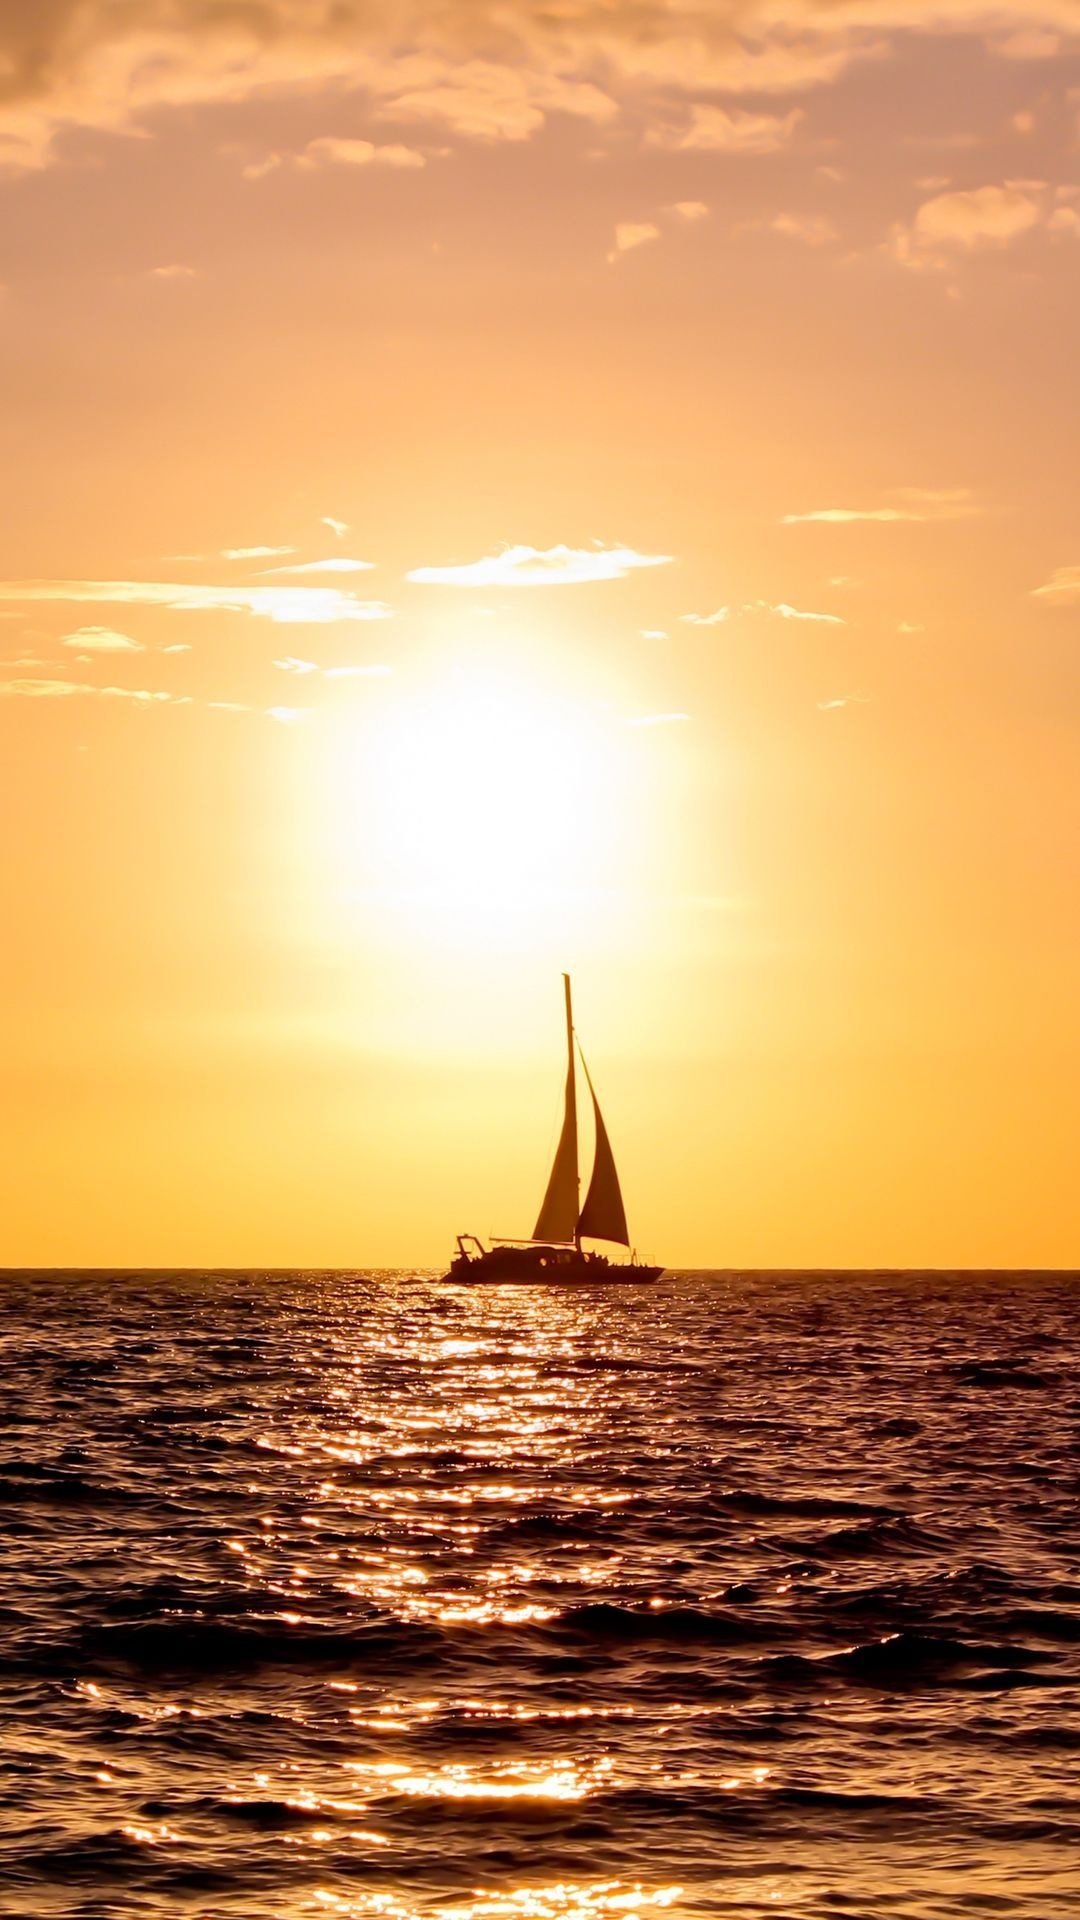 Sail Boat: A yacht, A craft used for pleasure and sport, Sunset. 1080x1920 Full HD Background.